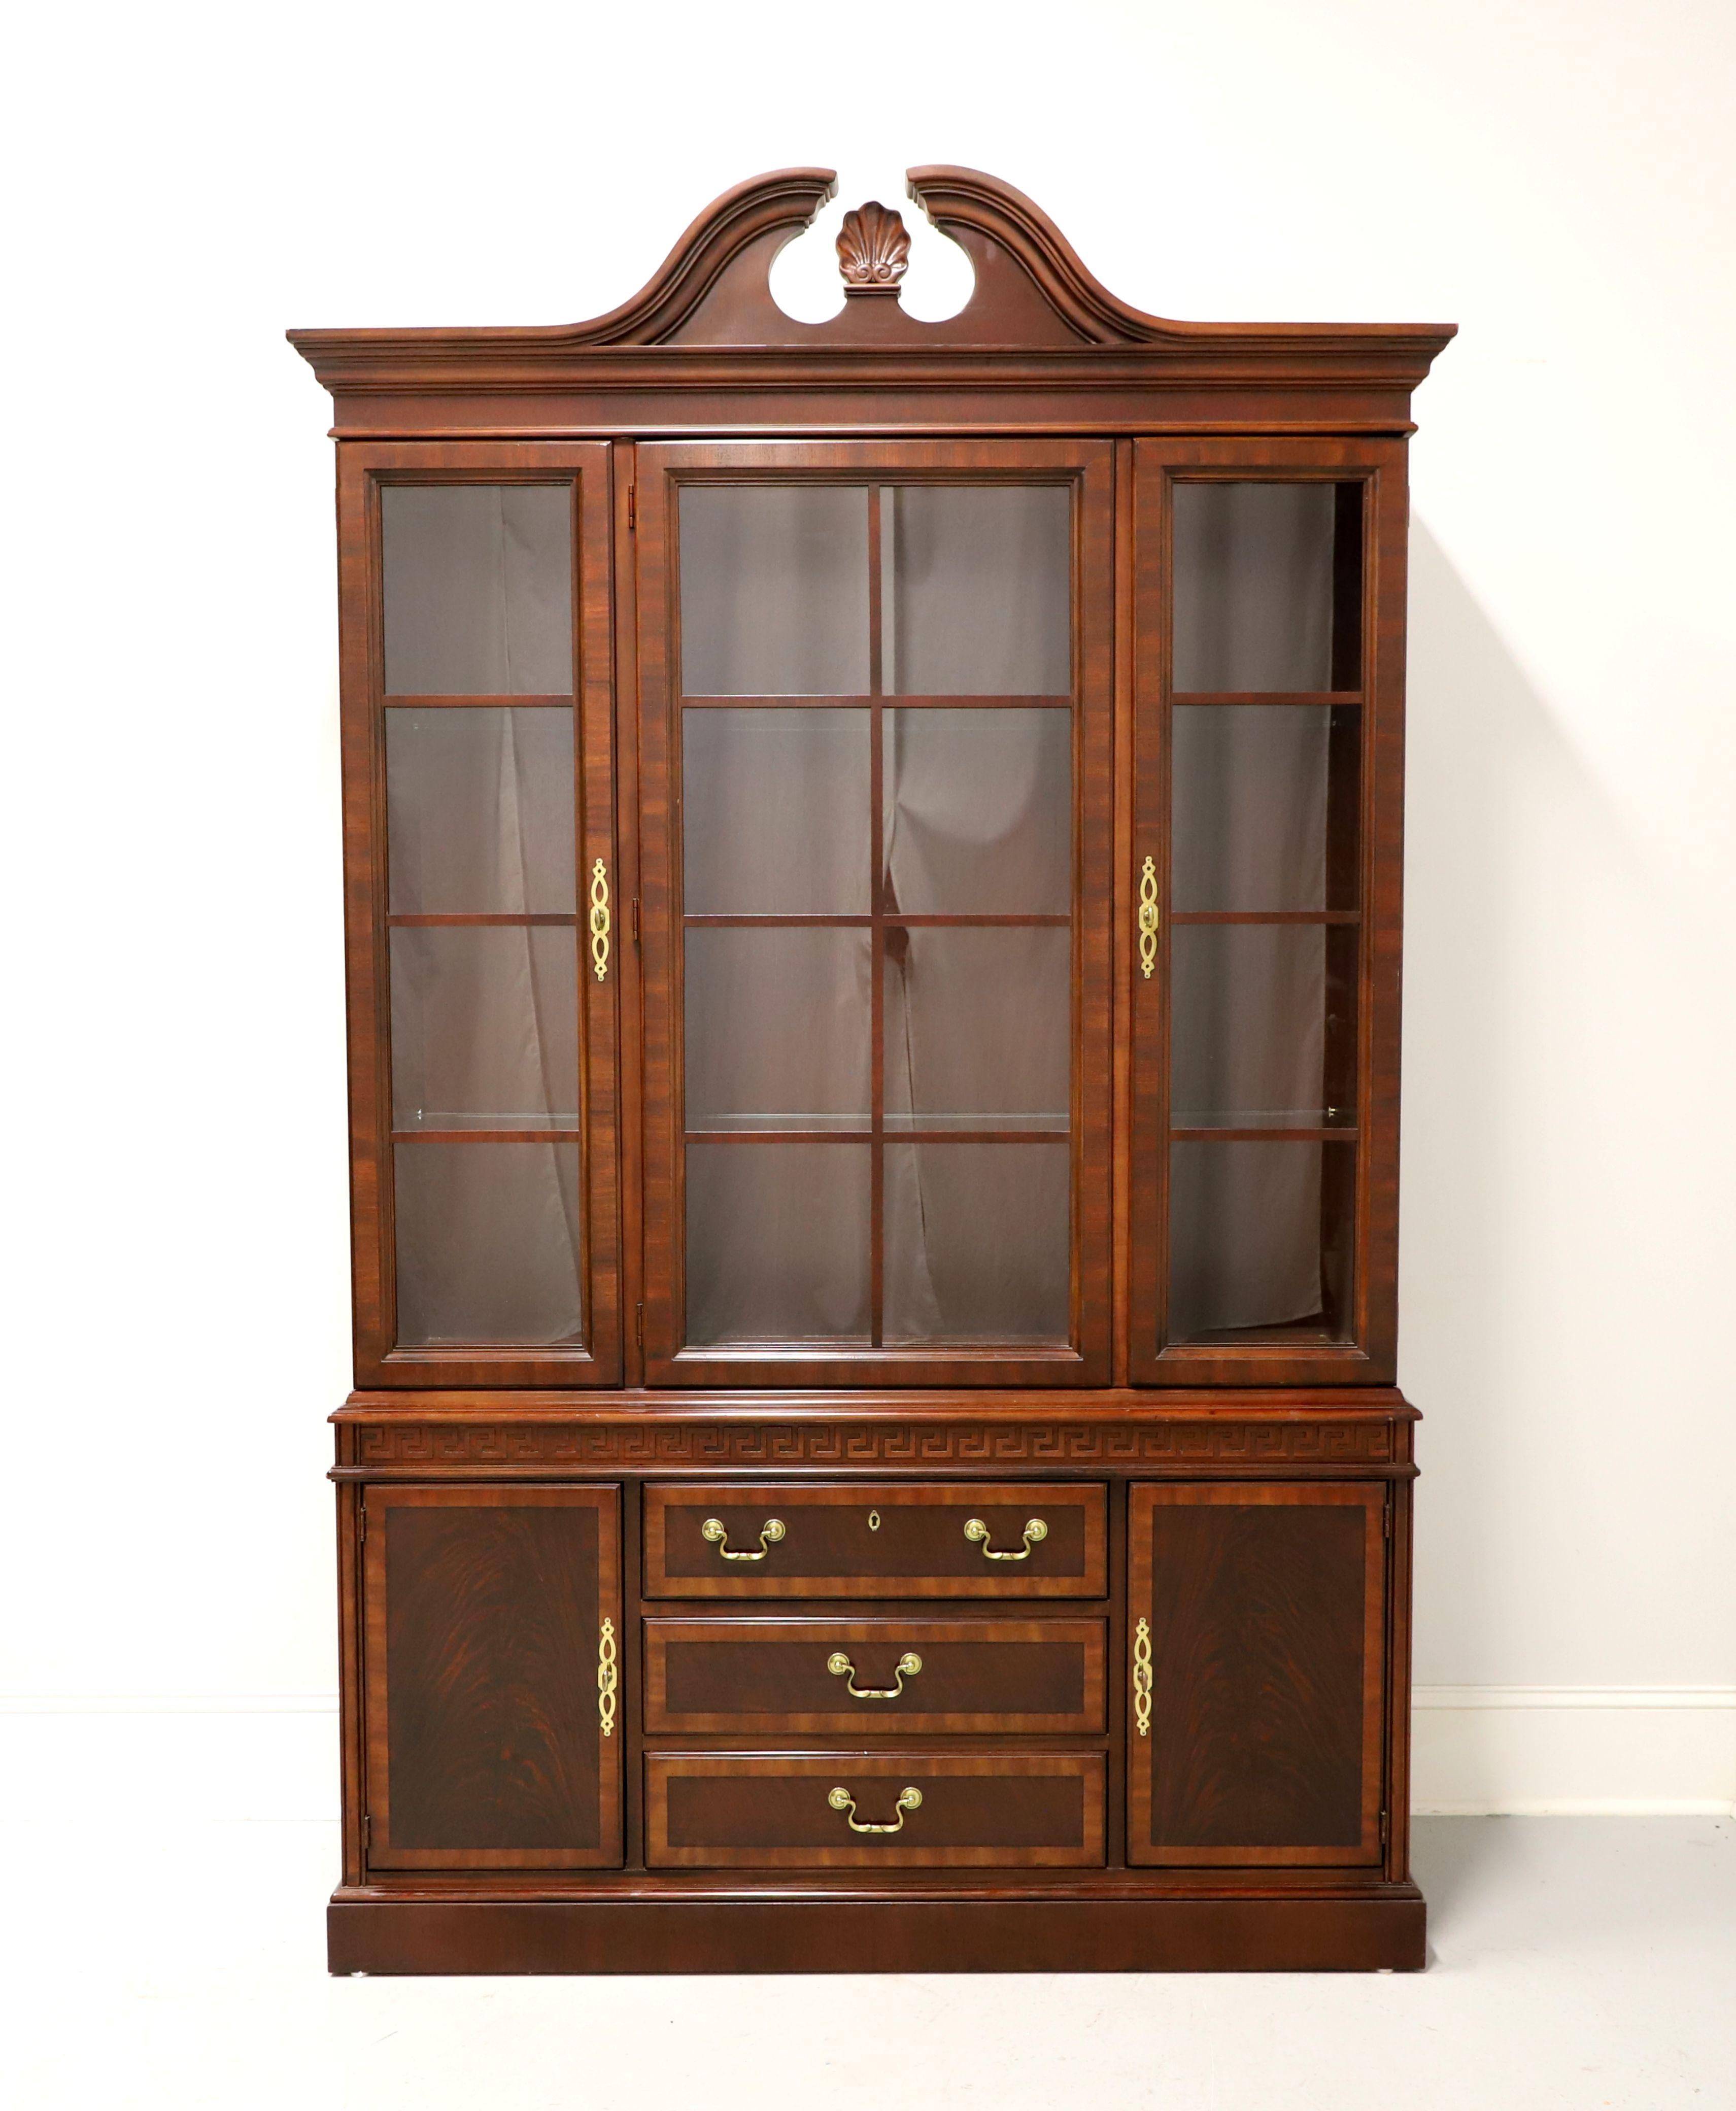 drexel heritage chippendale collection